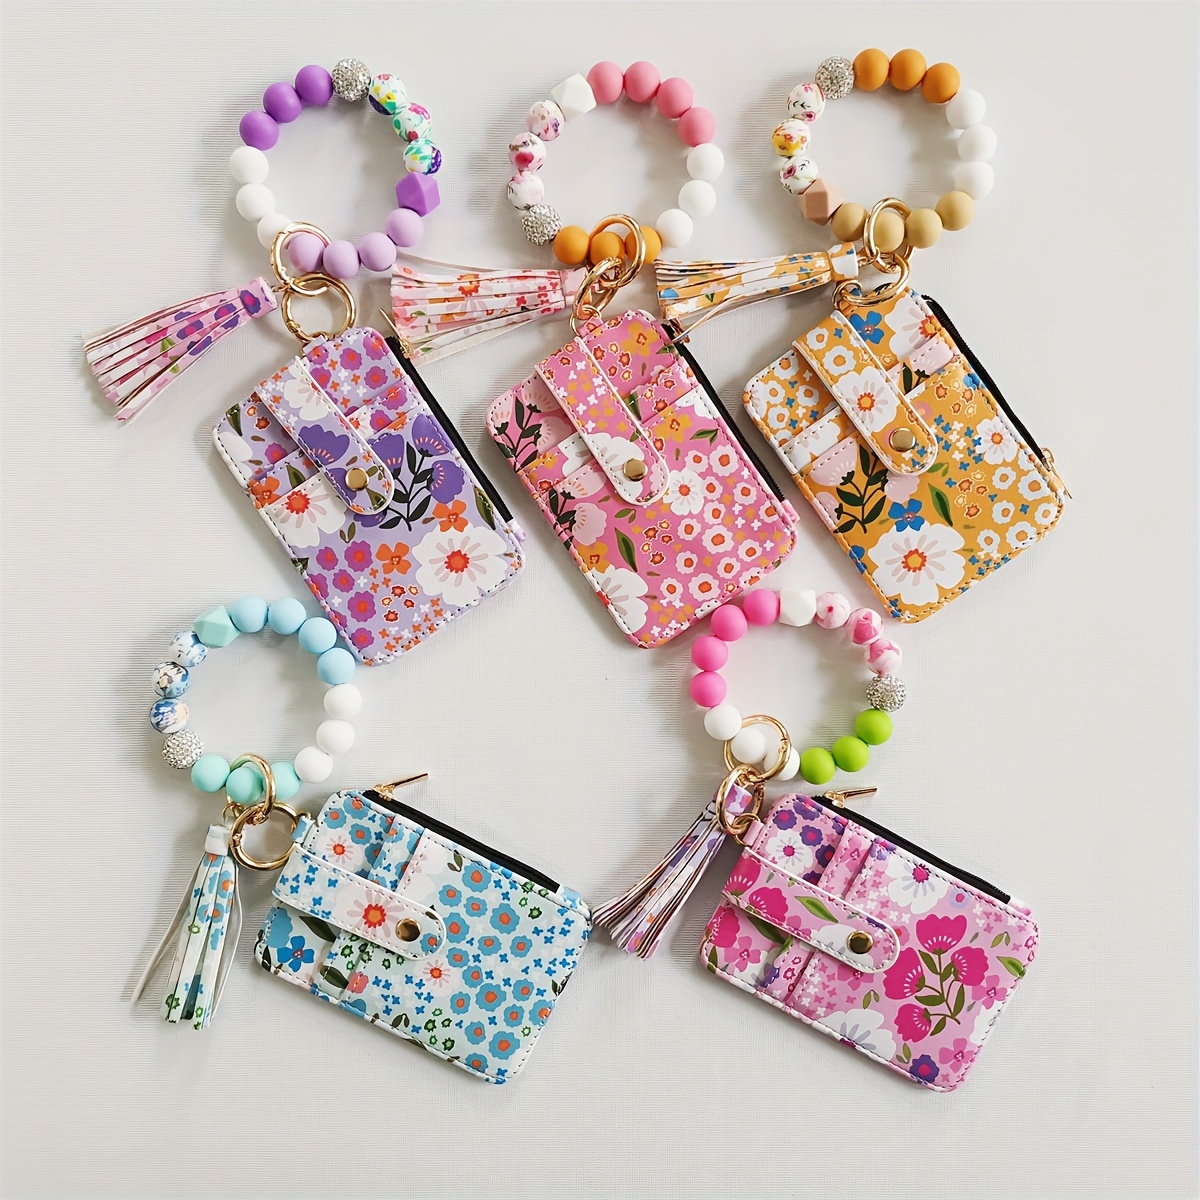 

Floral Pu Leather Tassel Wallets With Silicone Bead Keychains, Multi-card Holder Pouches, Ideal Gifts For Birthdays & Holidays